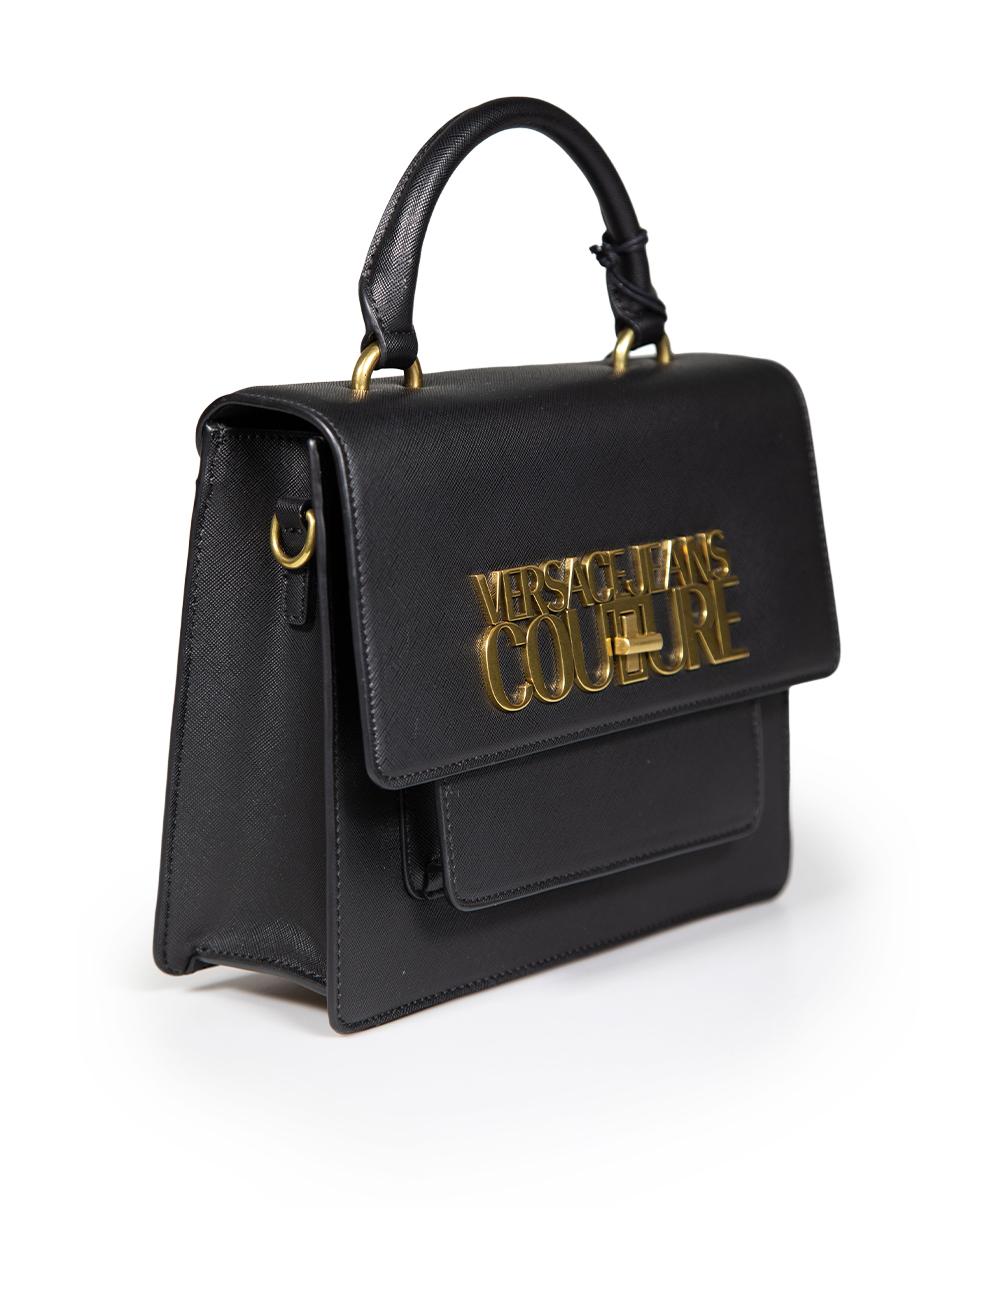 CONDITION is New with tags on this brand new Versace designer item. This item comes with original packaging. Minimal abrasion to handle and tarnished hardware due to poor storage.
 
 
 
 Details
 
 
 Model: EE1VWABL5
 
 Season: FW23
 
 Black
 
 Faux